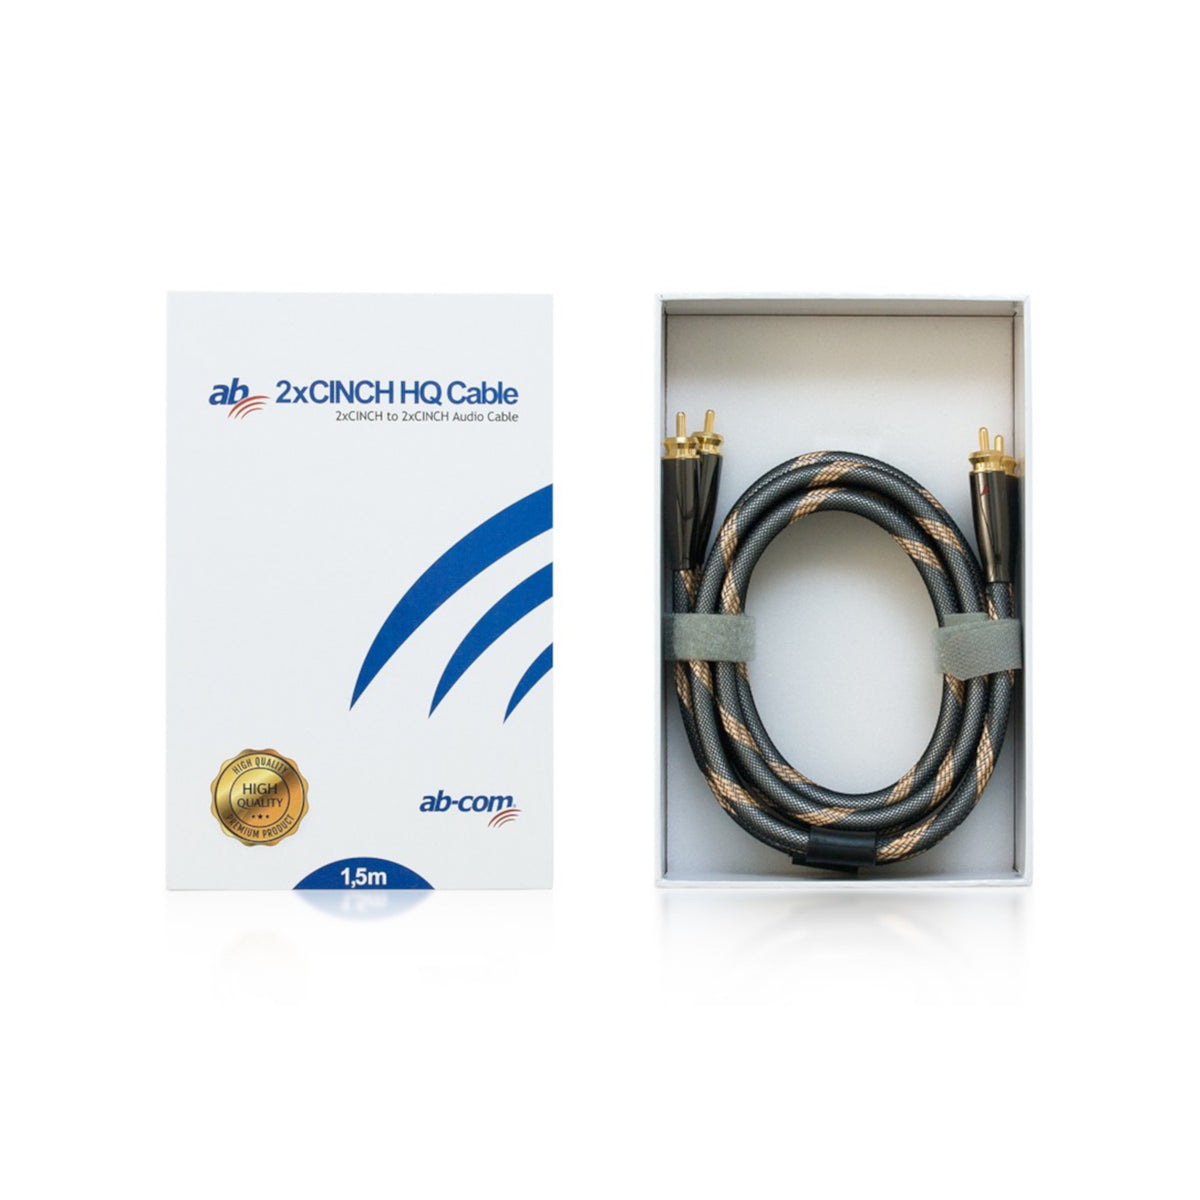 15m 3.5mm Jack to 2 x RCA Cable - Premium Quality / 24k Gold